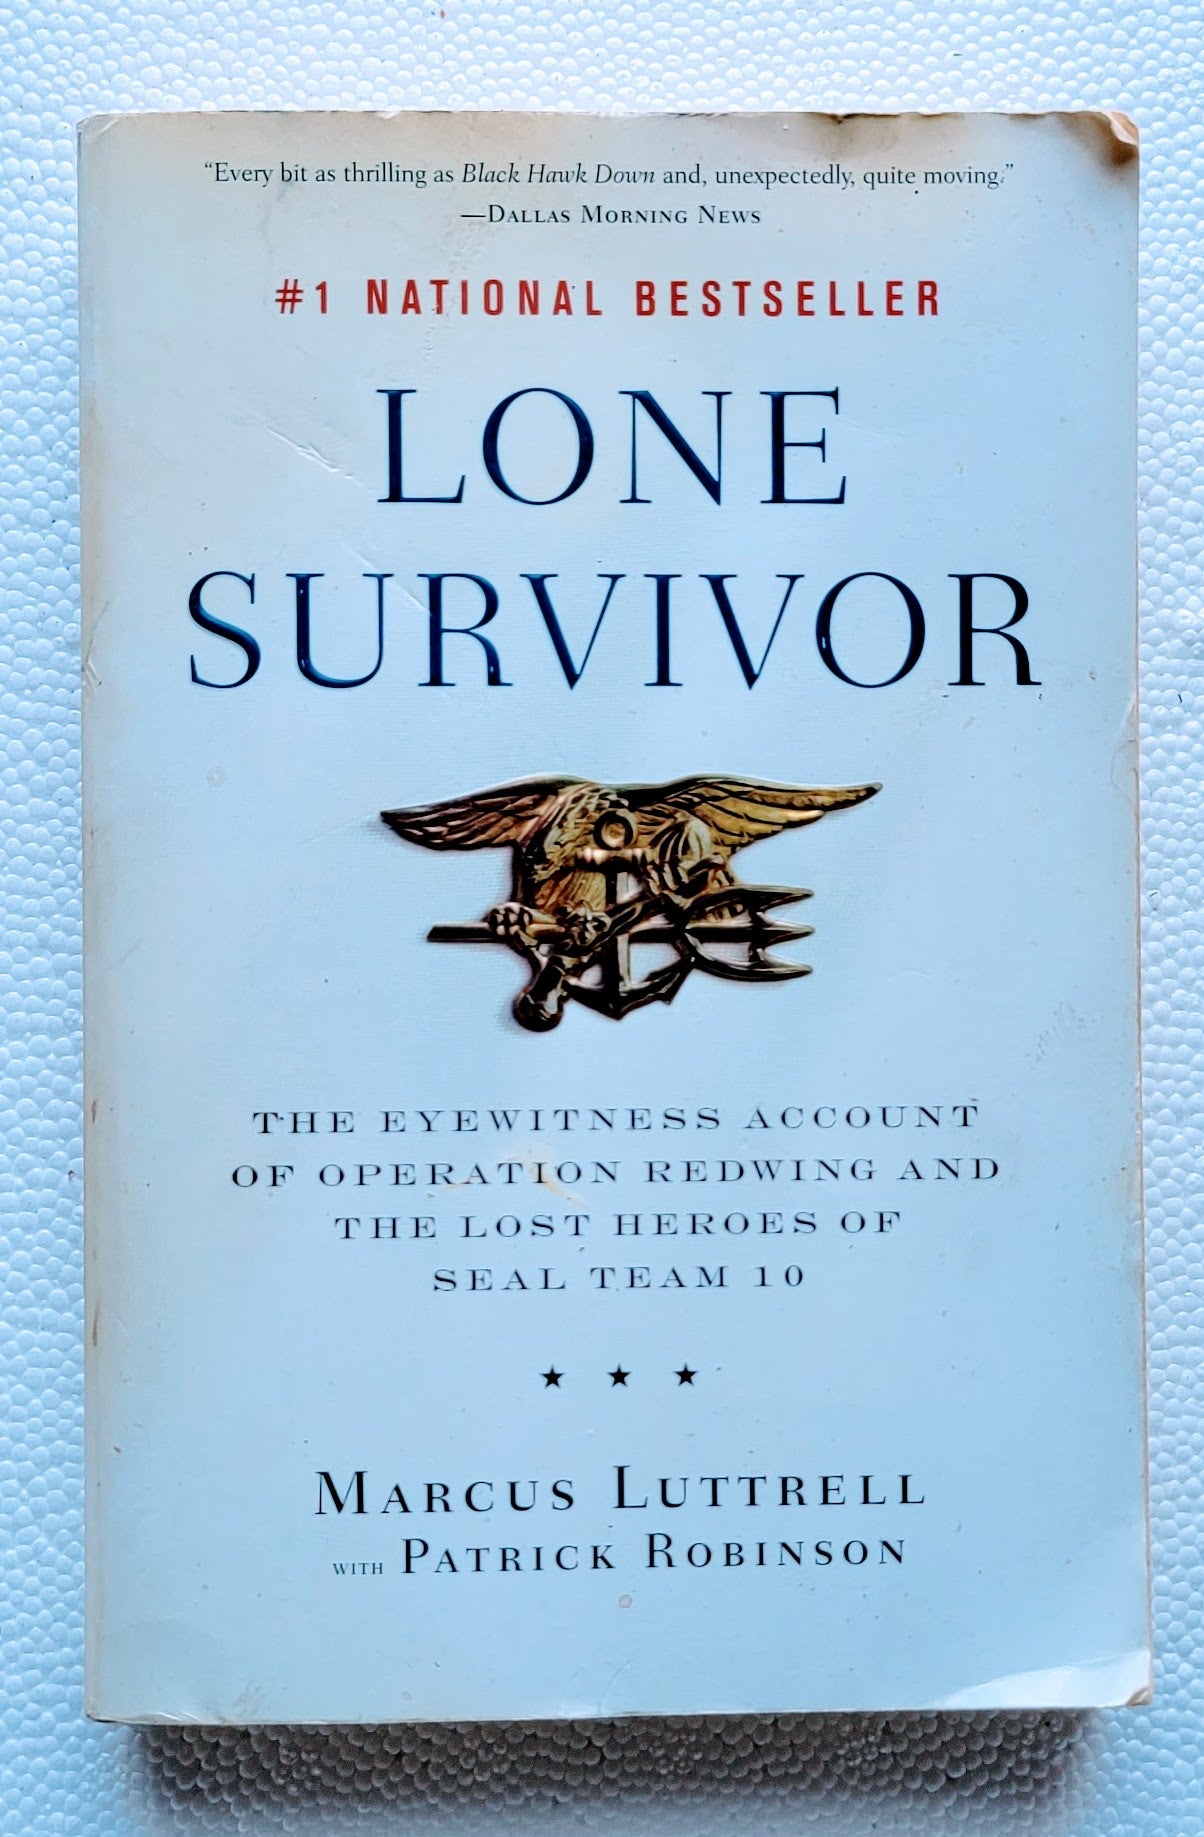 Lone Survivor: The Eyewitness Account of Operation Redwing Book by Marcus Lattrell  Xclusive Collectibles   